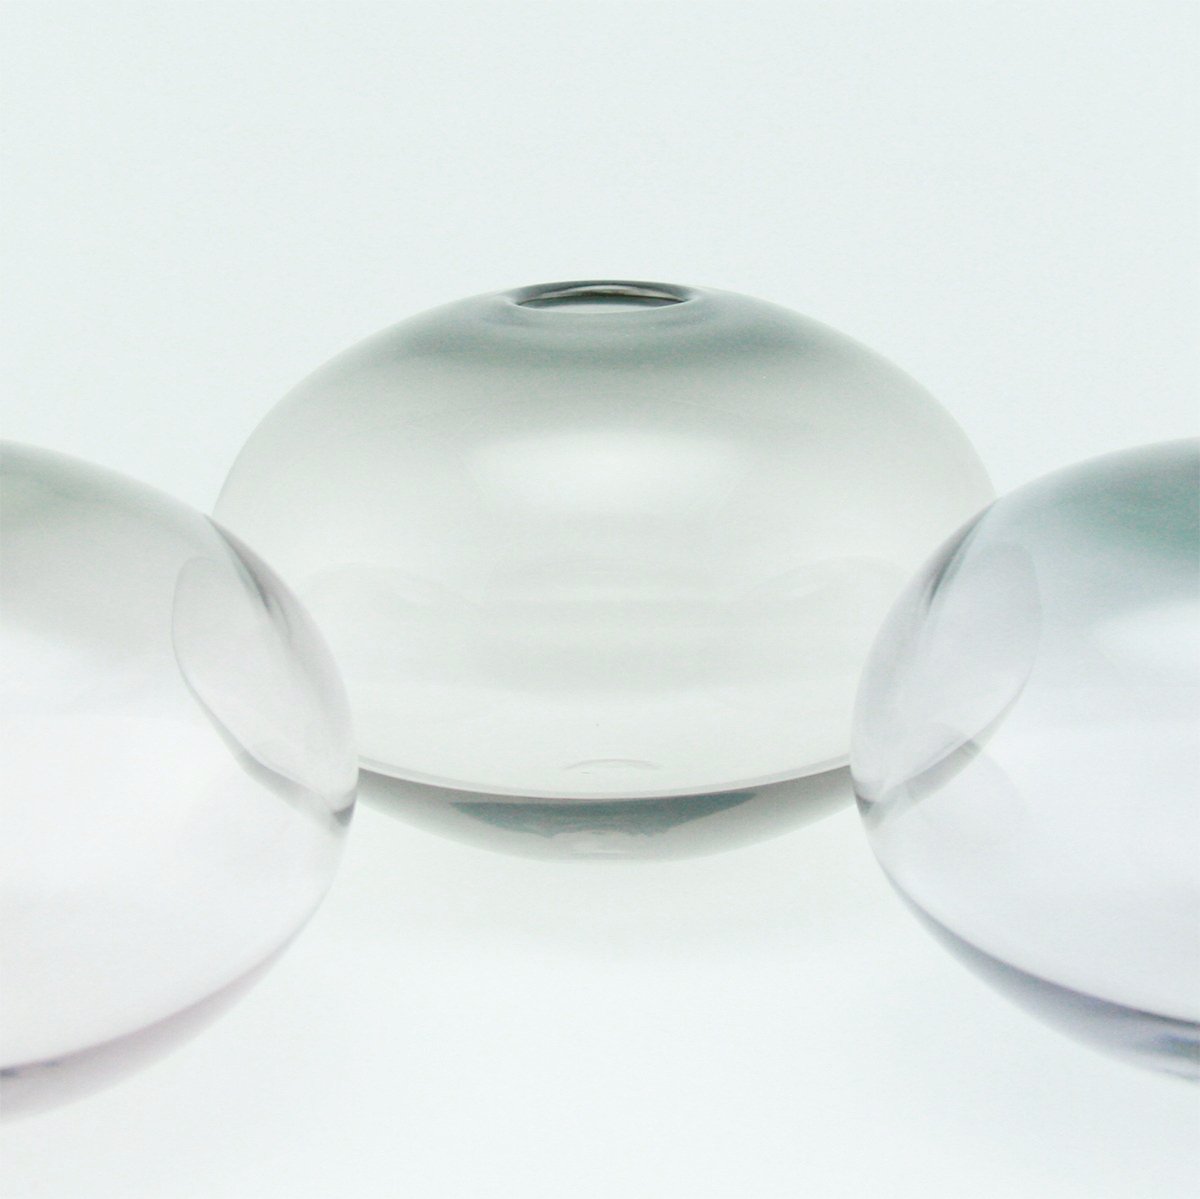 Muted Orb Vessels